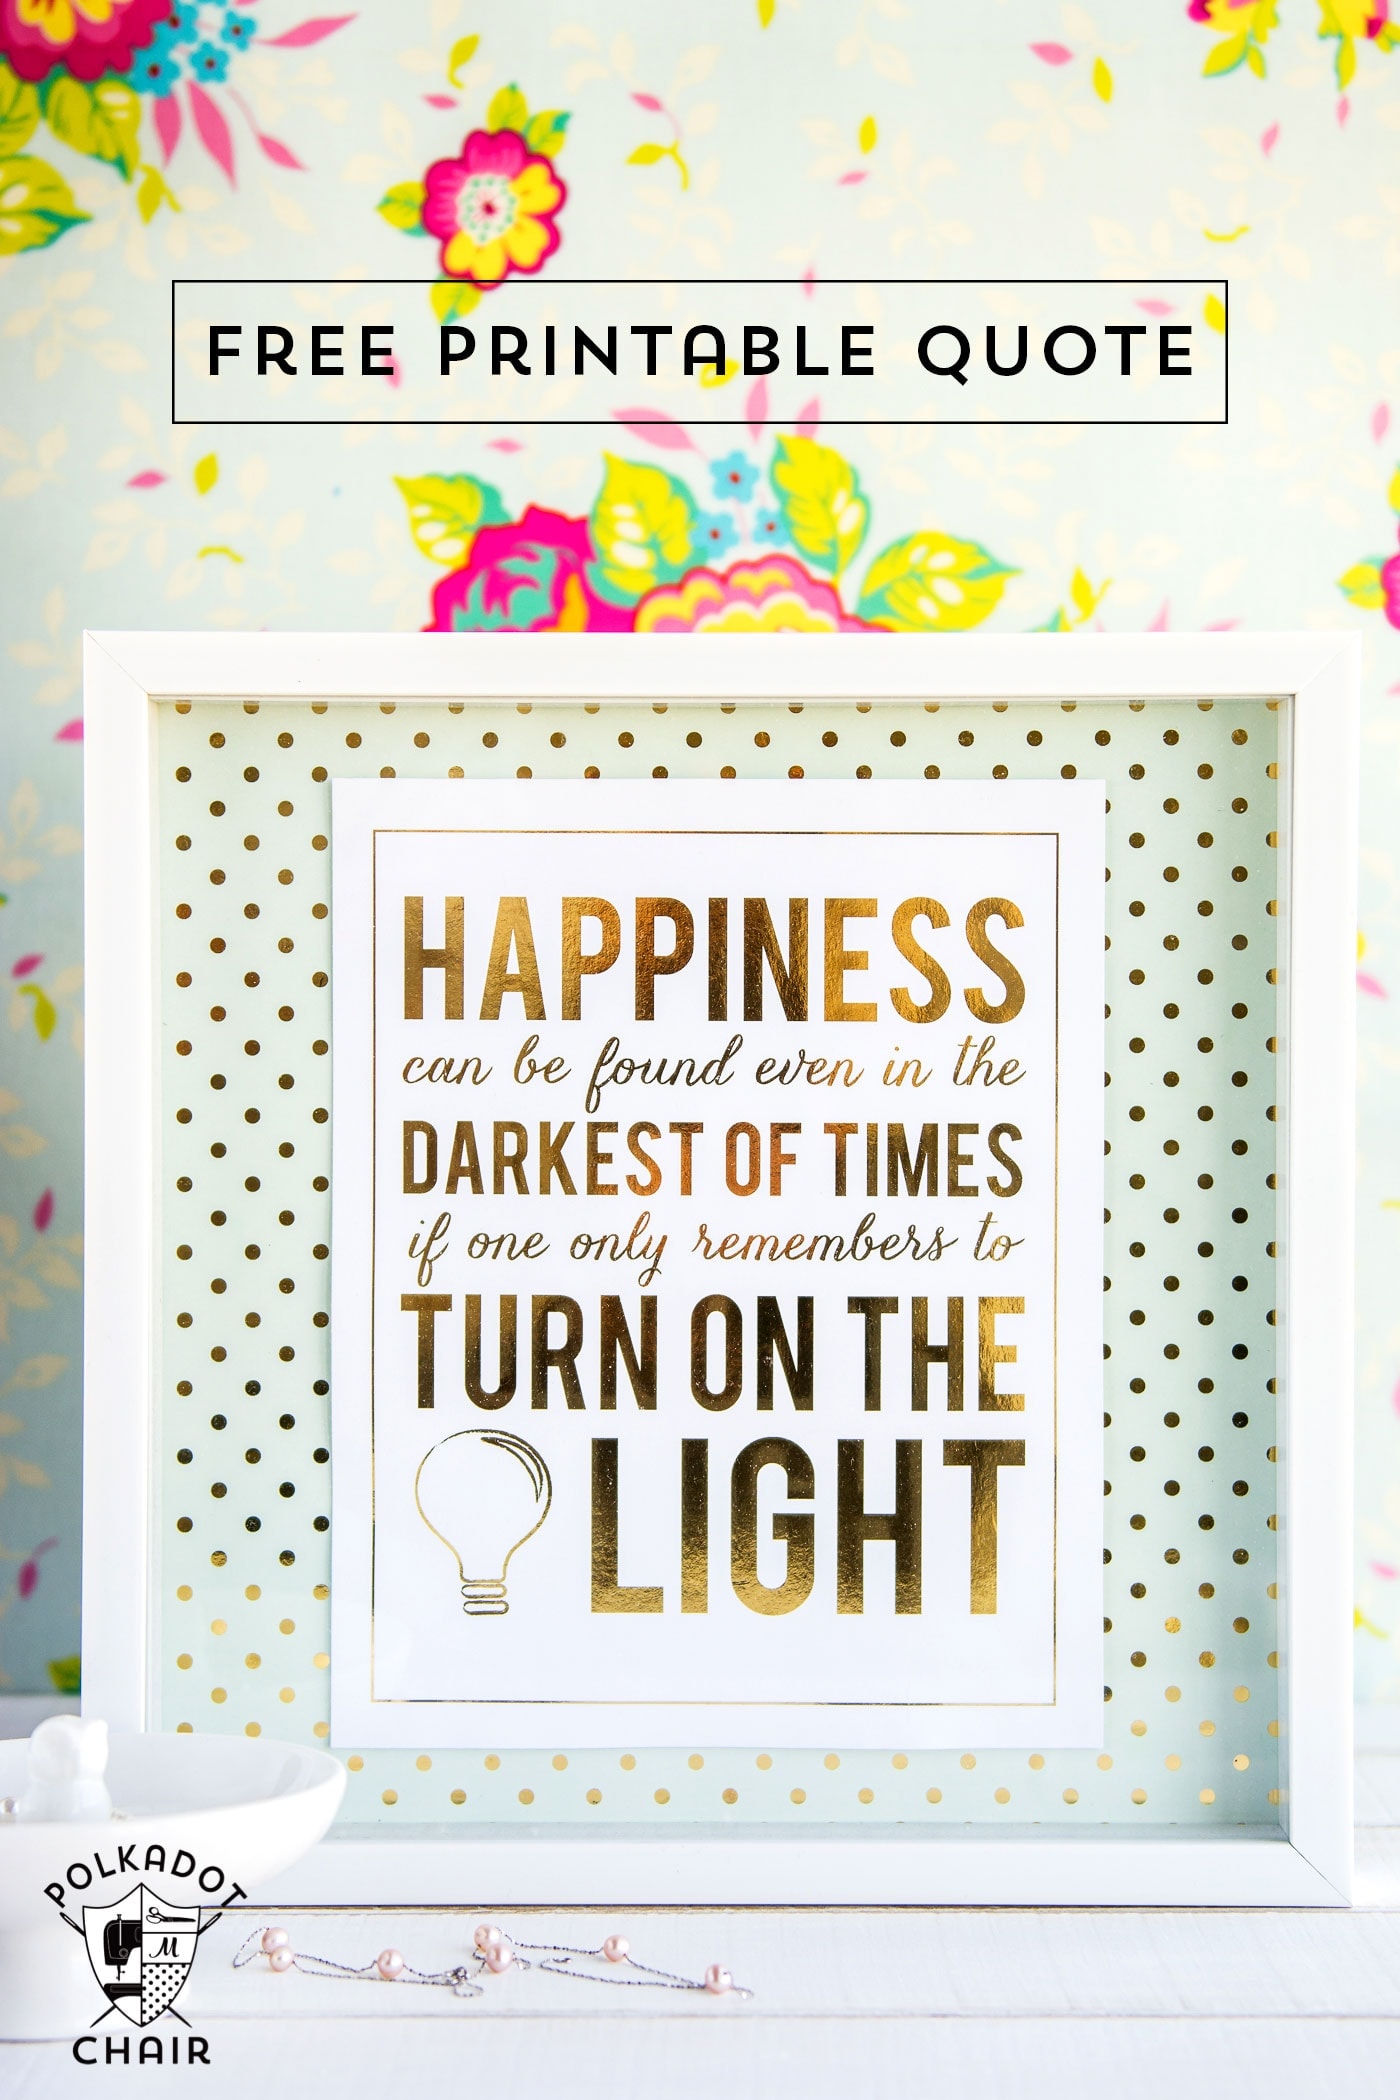 Free Printable Quote from Harry Potter, "Happiness can be found in the darkest of times if one only remembers to turn on the light" ... can be used with Minc Machines to add foil.